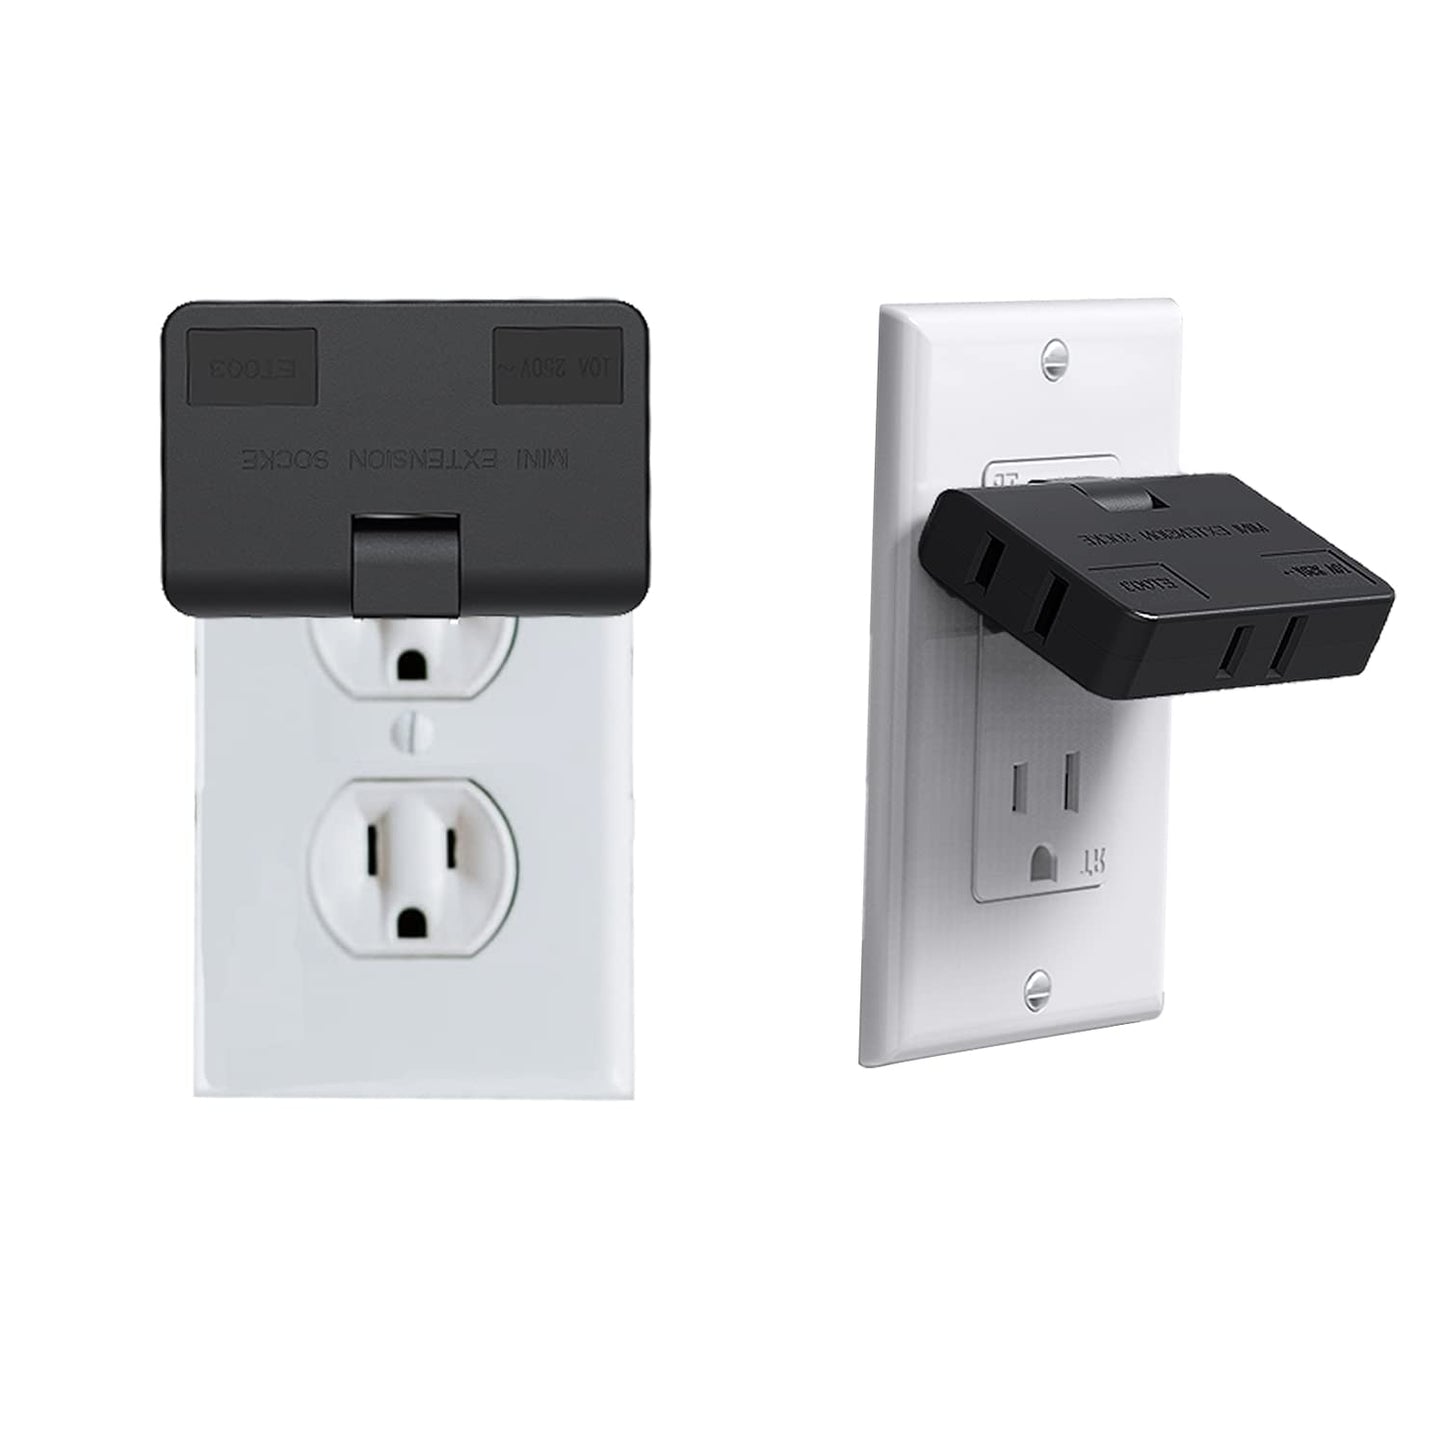 3 OUTLET WALL ADAPTER